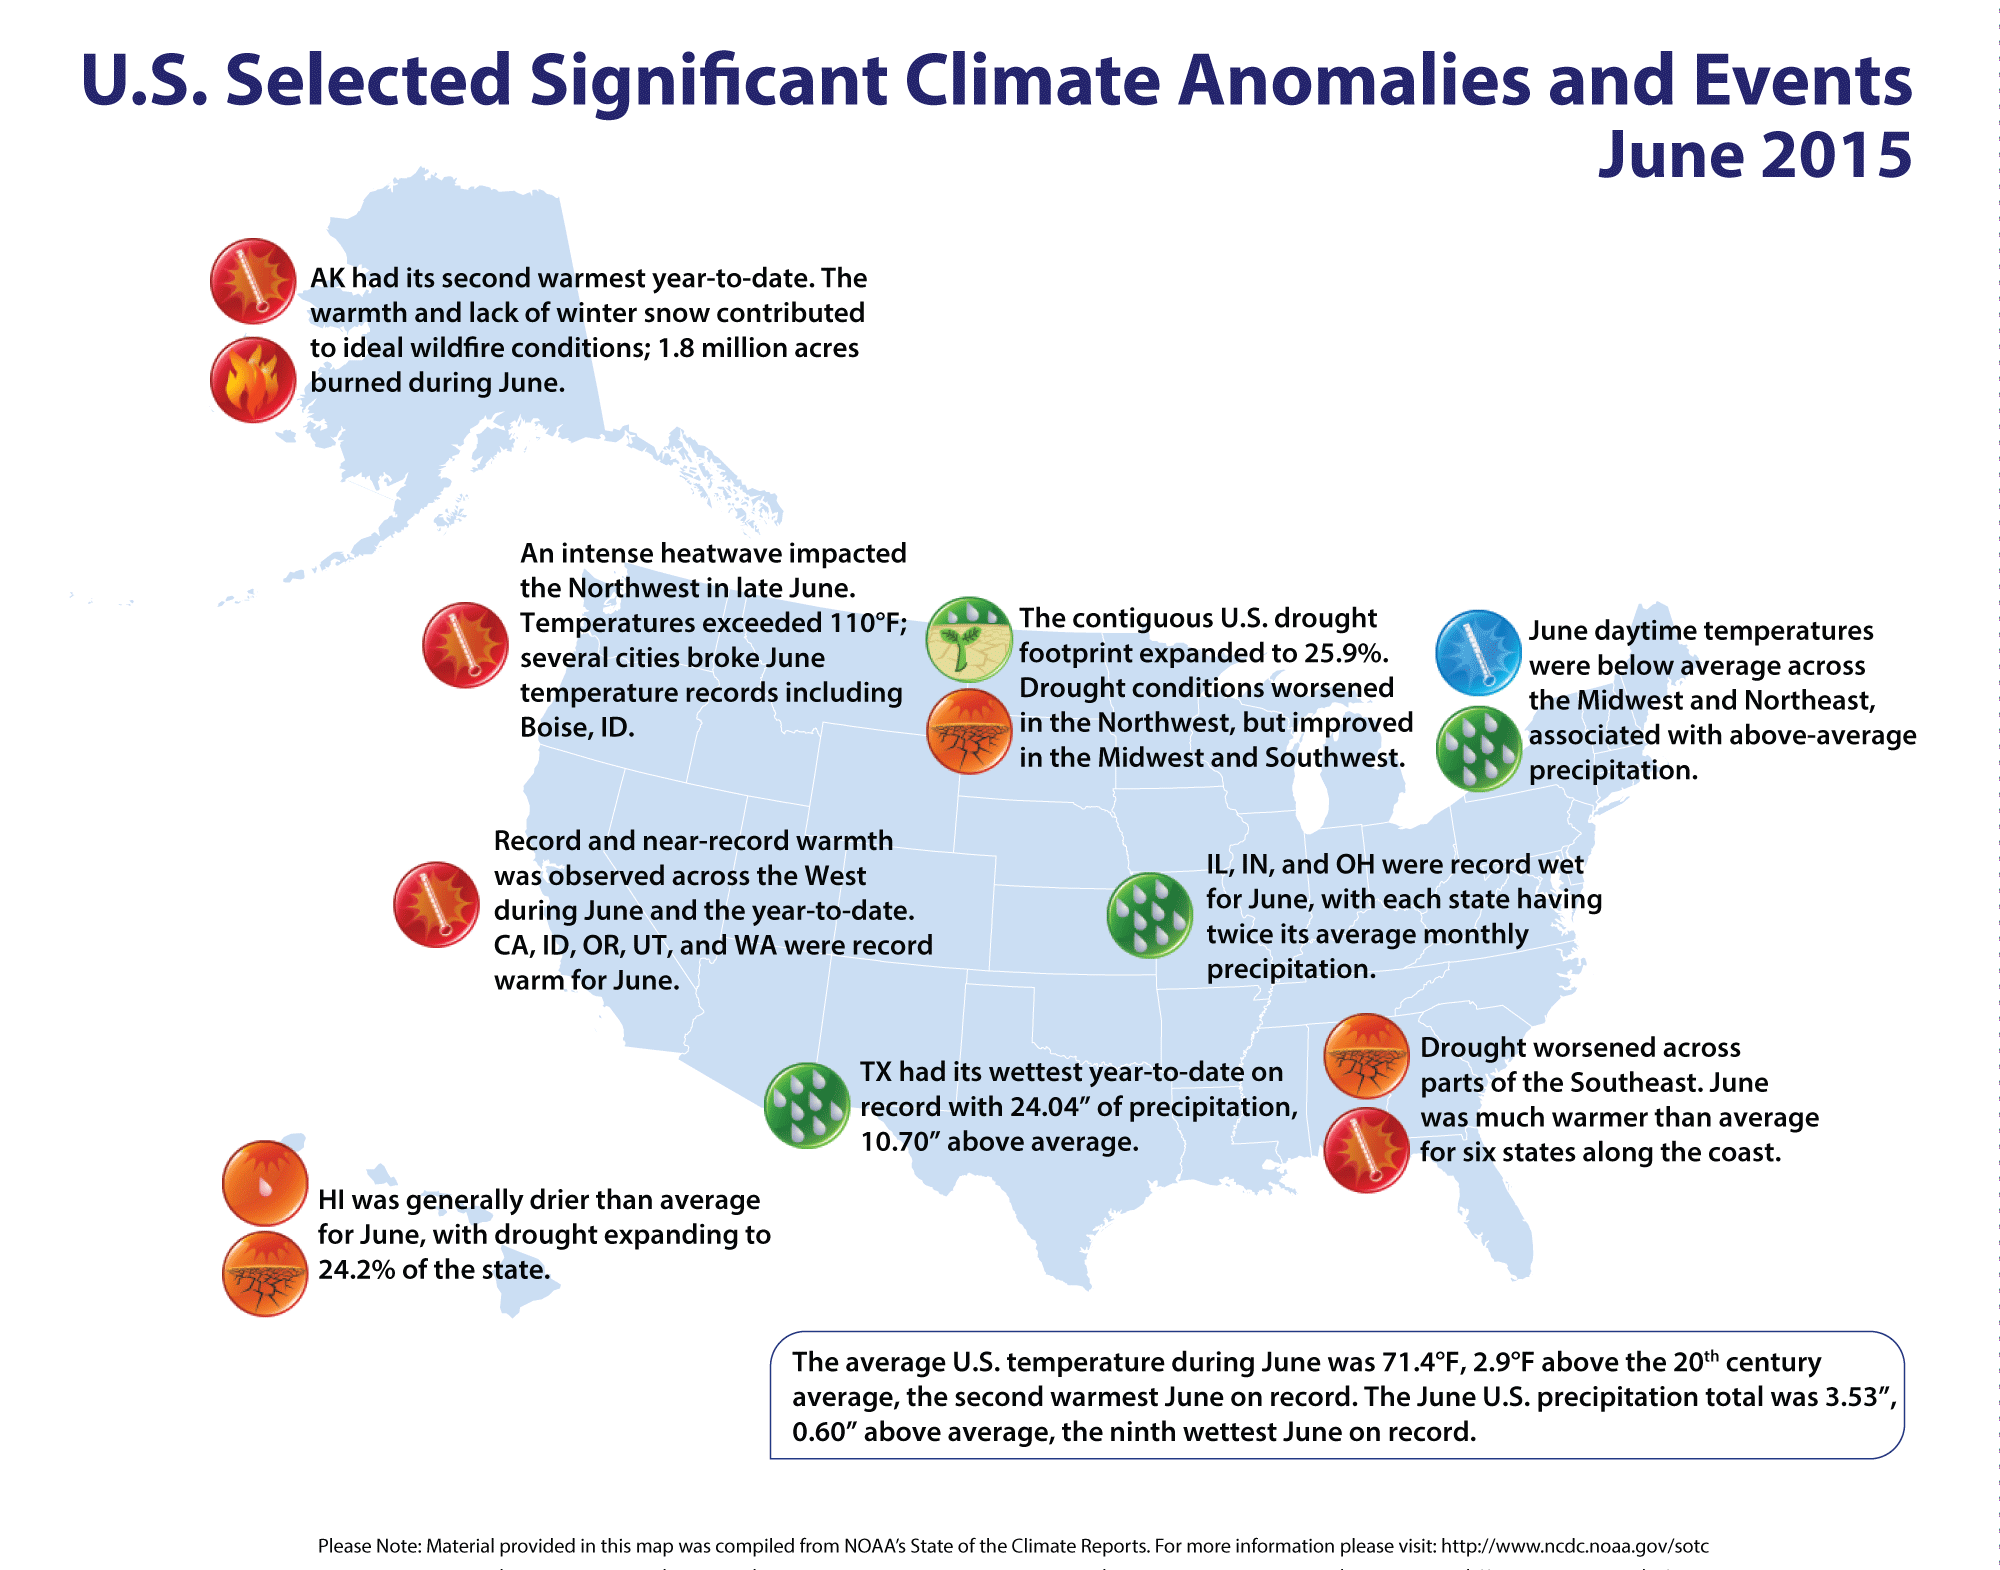 June Extreme Weather/Climate Events